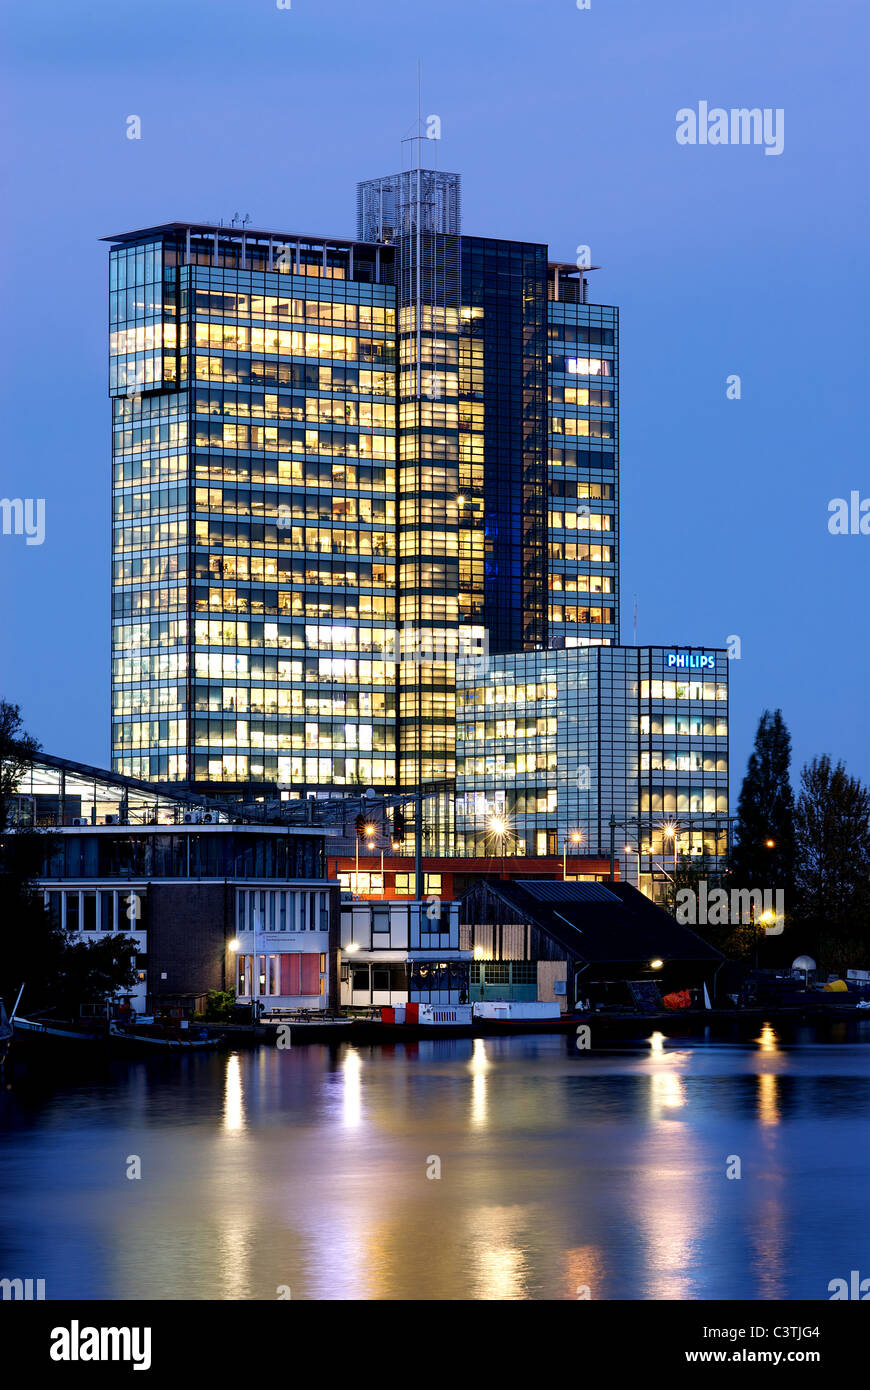 The headquarters of Philips Consumer Lifestyle at dawn, Amsterdam, Netherlands Stock Photo